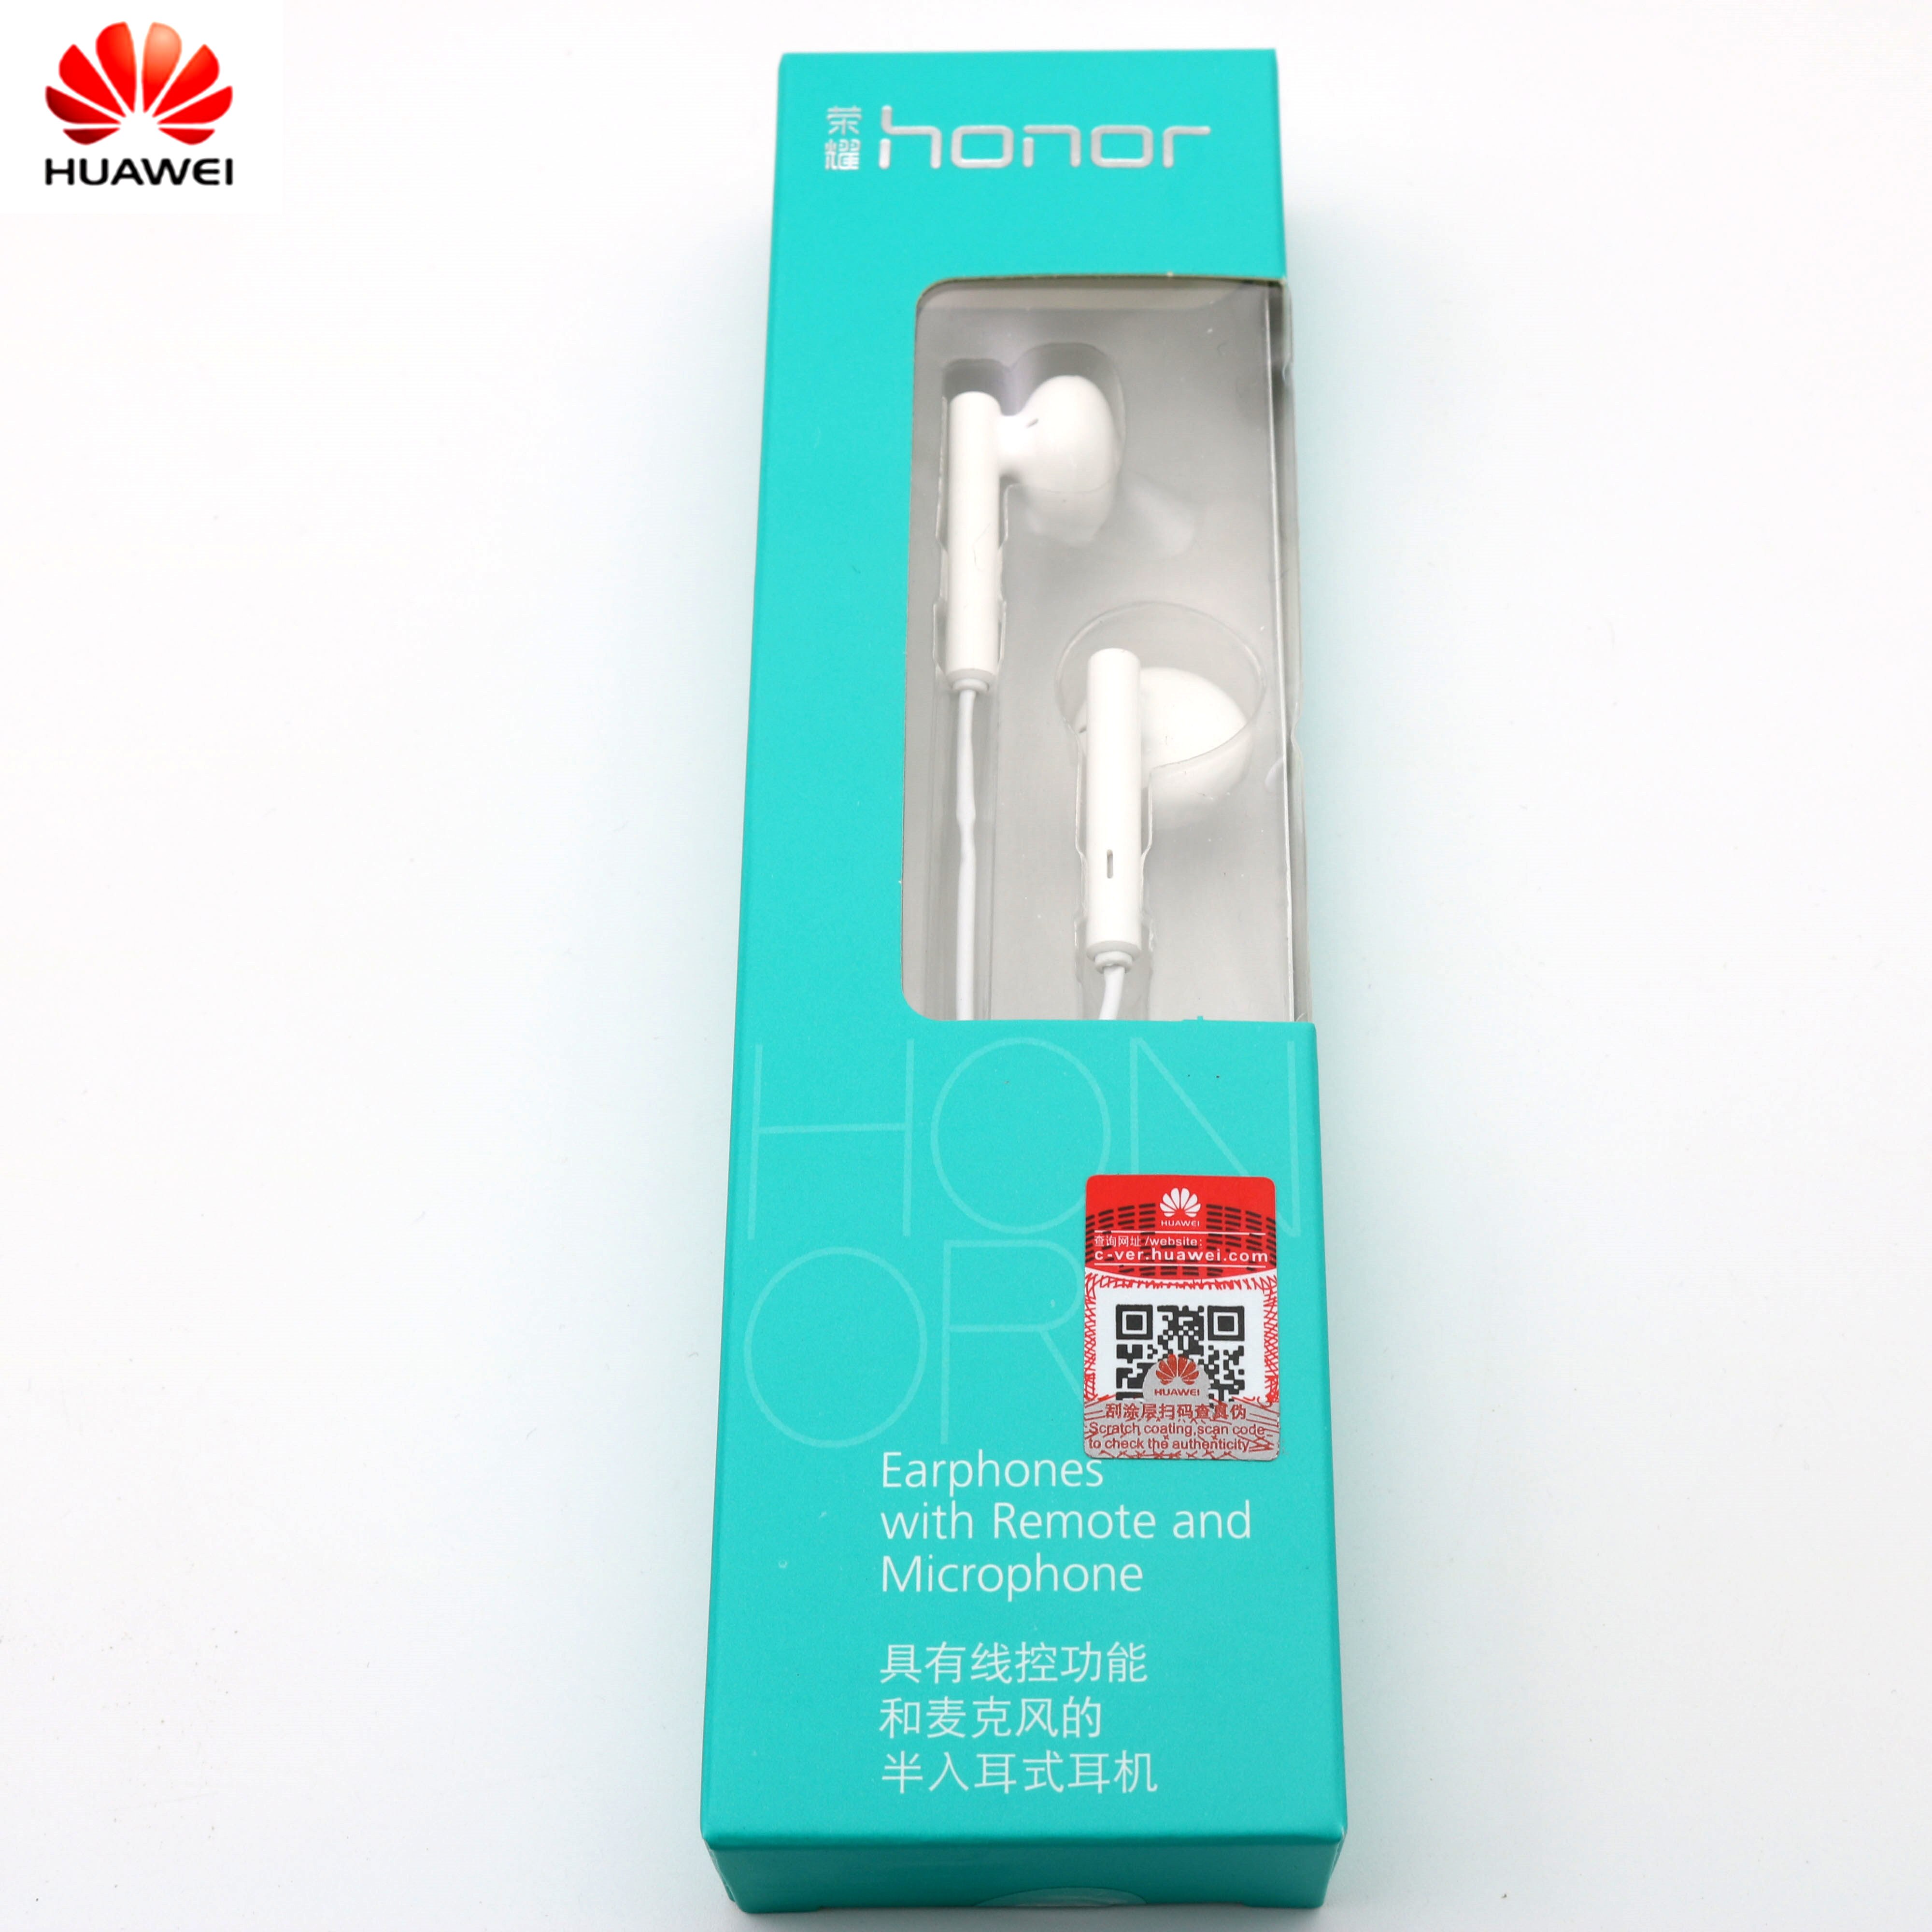 Original Huawei Honor AM115 Earphone with 3.5mm in Ear Earbuds Headset Wired Control for Honor 8 Huawei P10 P9 P8 Mate9 phone